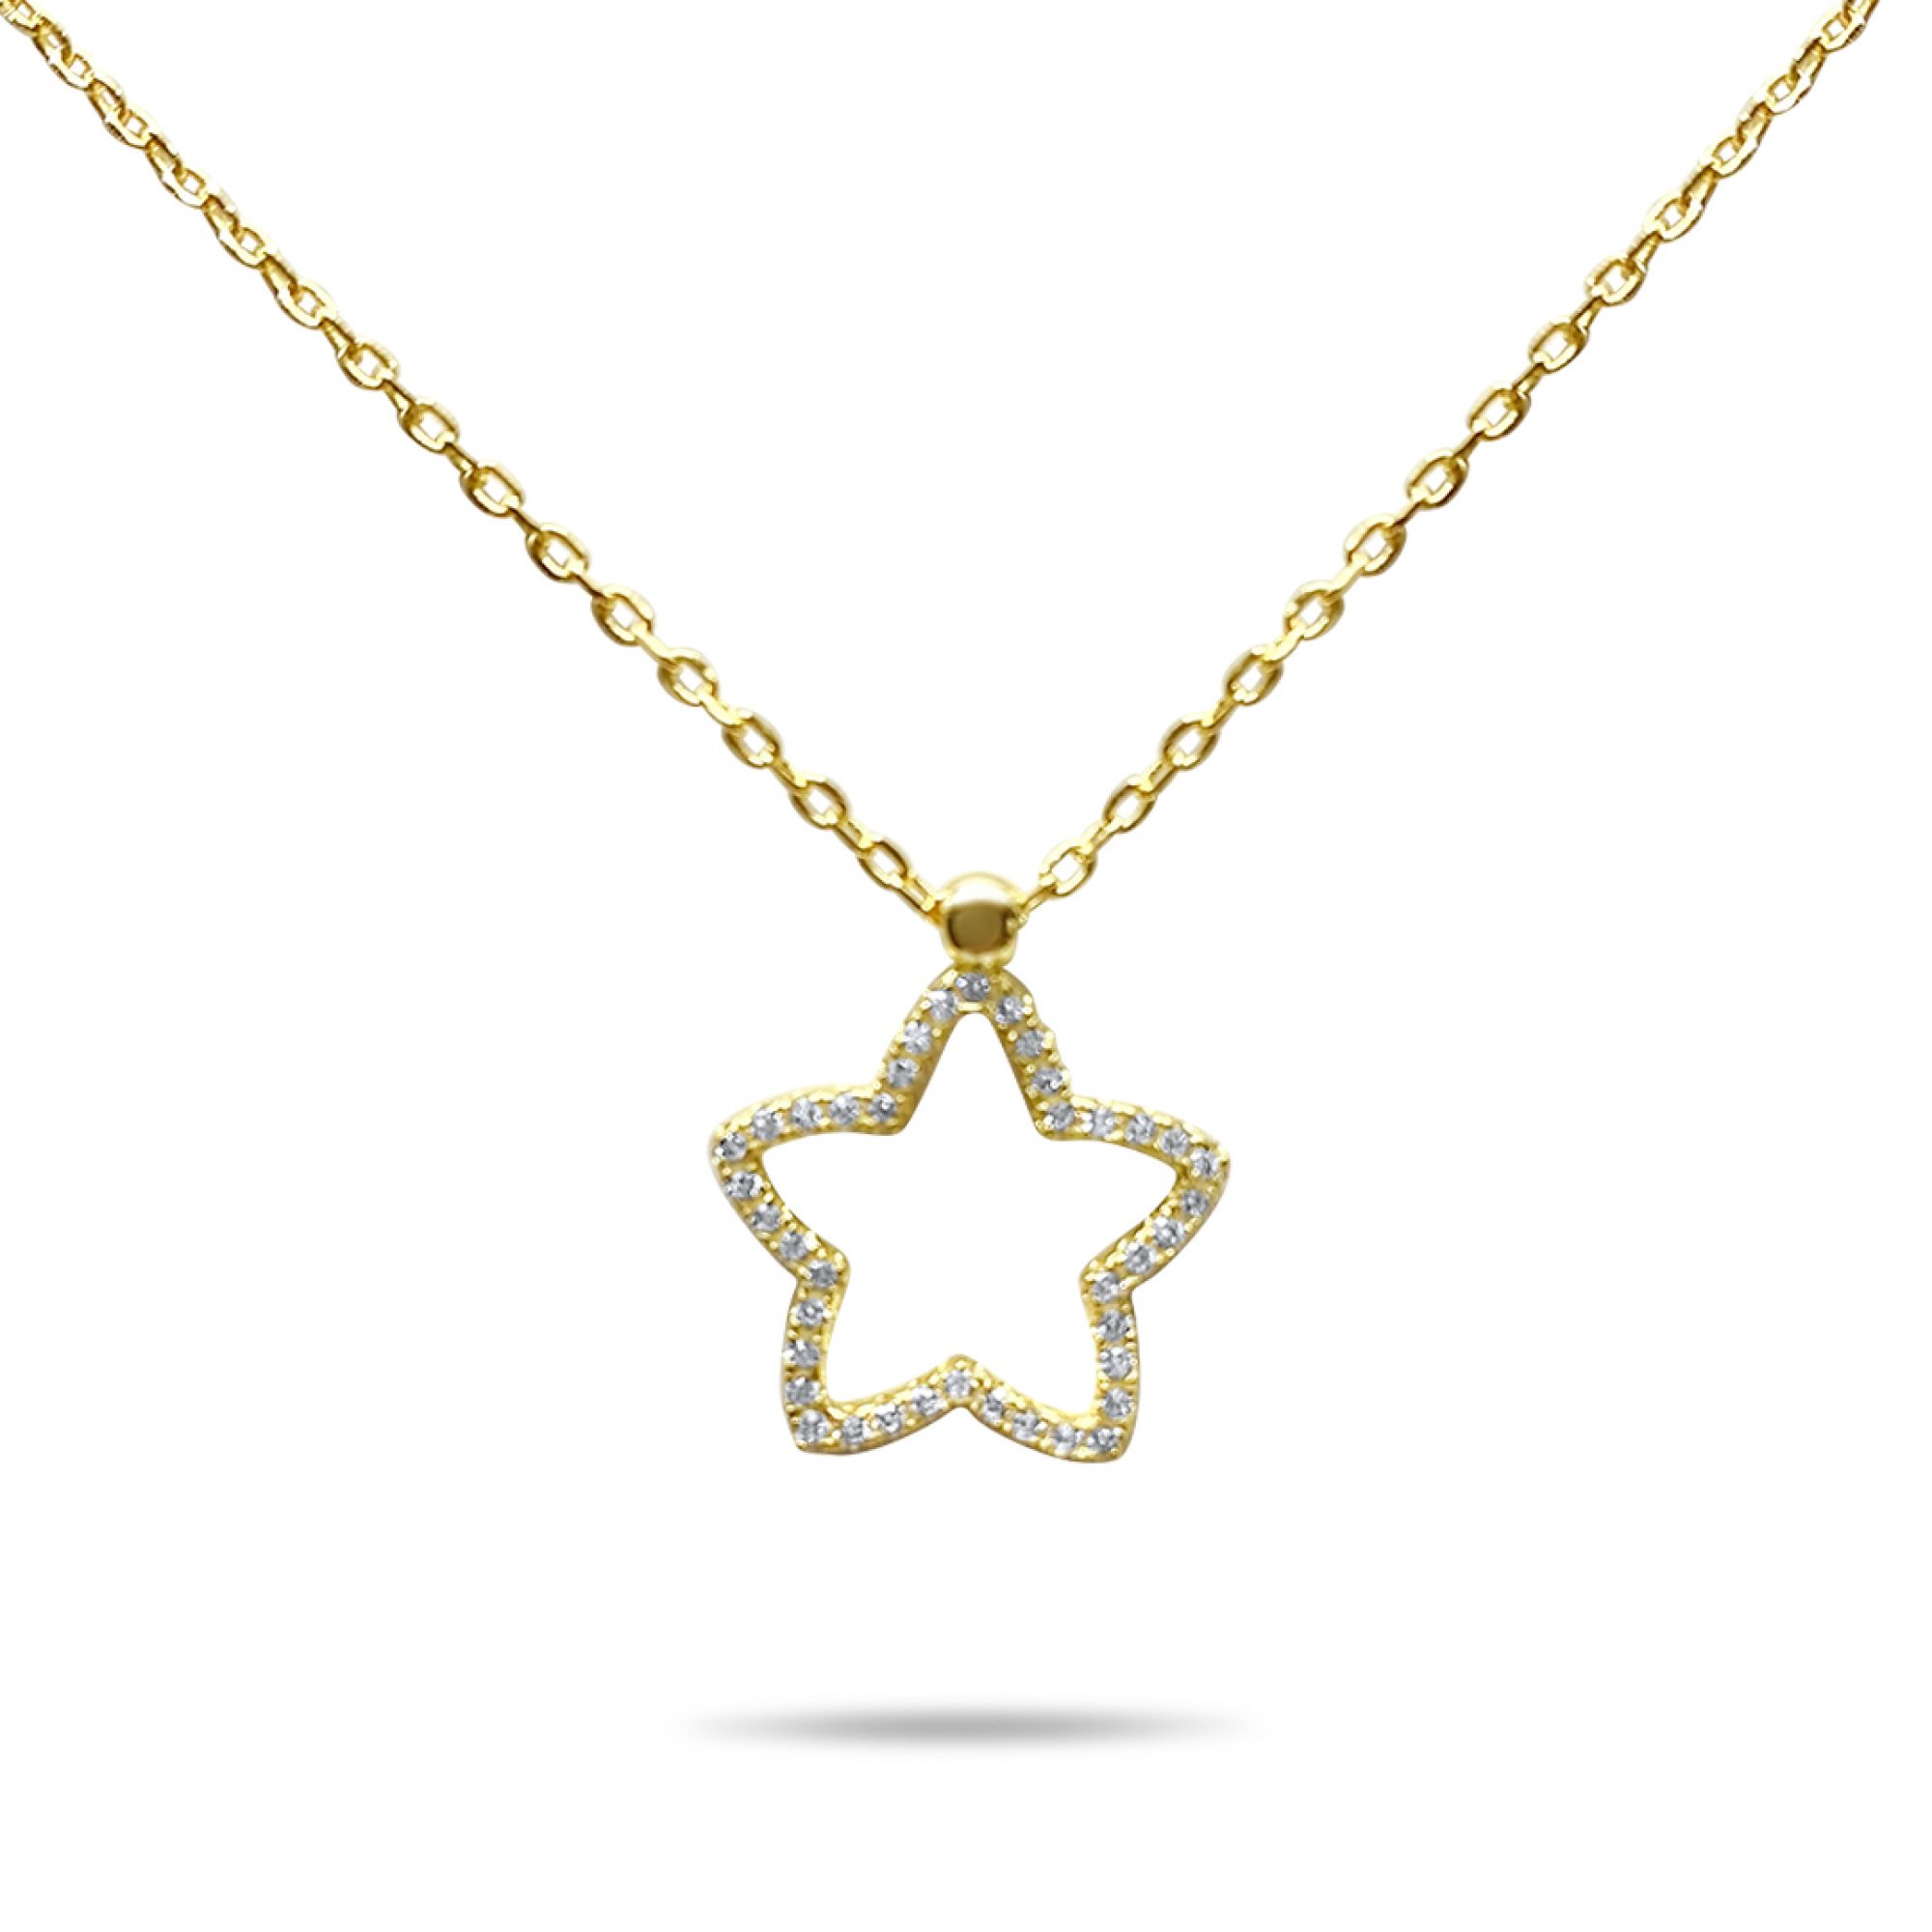 Gold plated star necklace with zircon stones